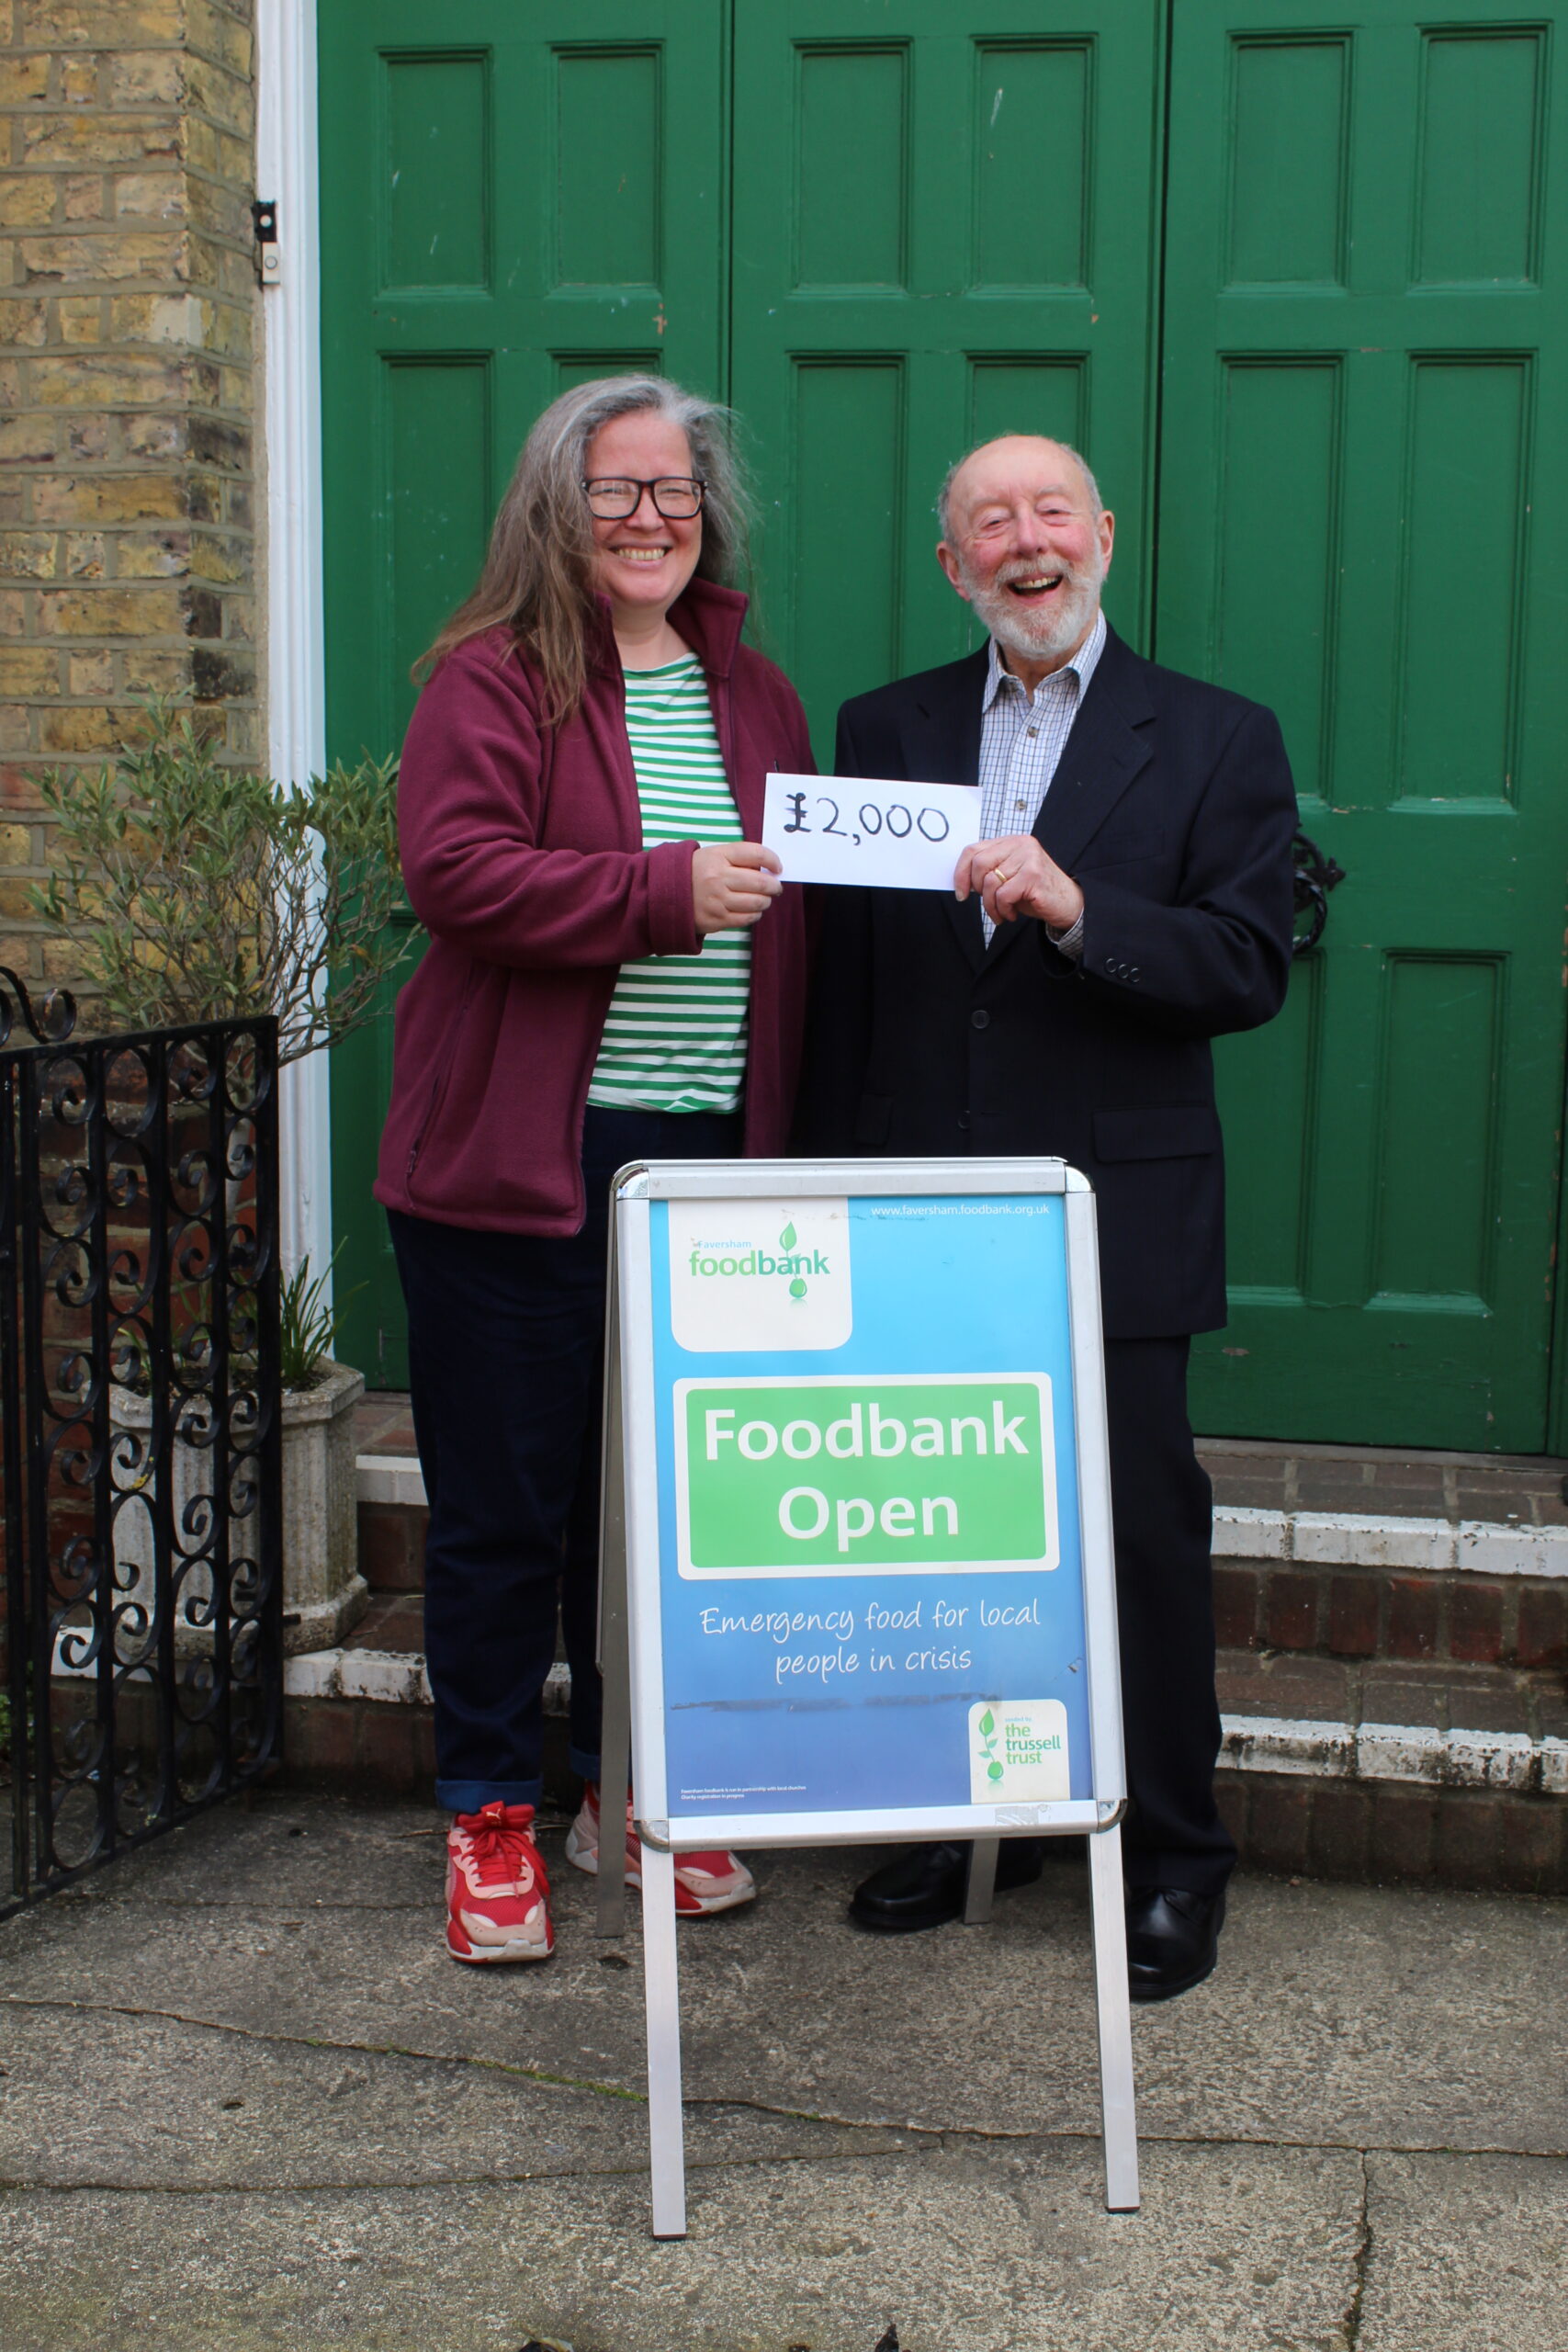 A picture of the cheque for £2000 being presented by Ernie, who handed over the cheque to Magdalen Deakins, Faversham Foodbank's project.